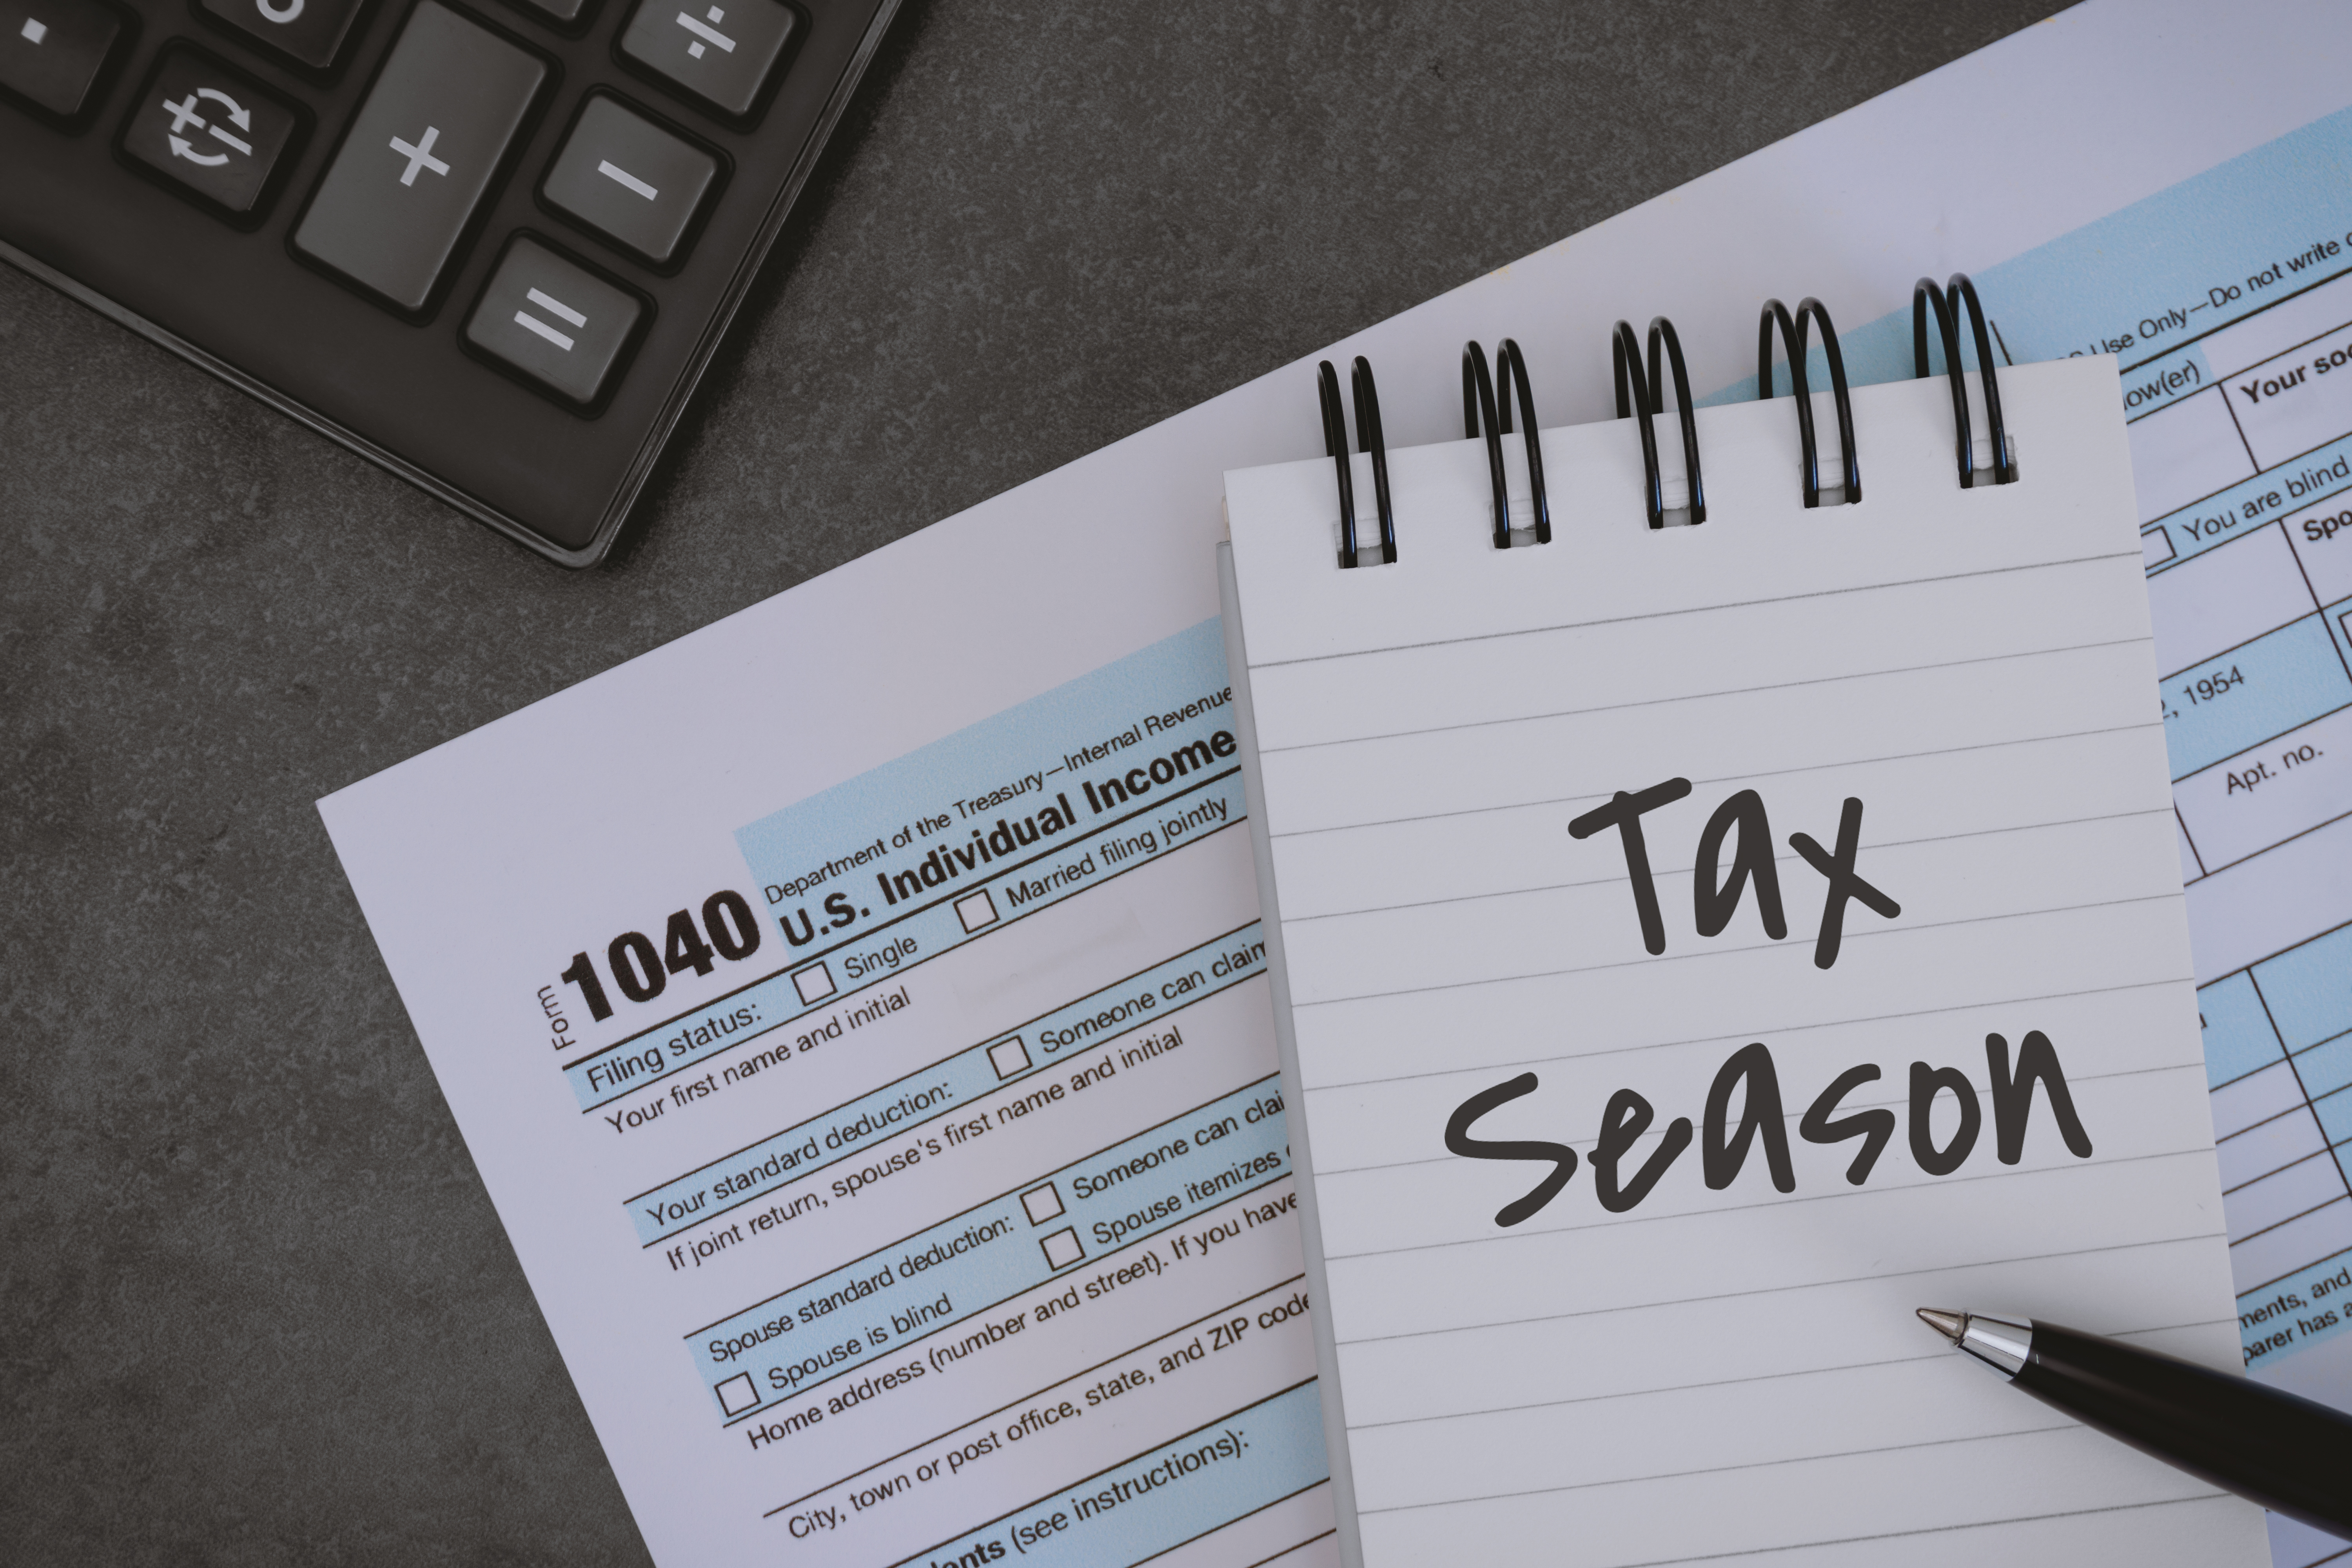 The U.S. income tax deadline is coming soon. Here’s what you need to know about filing, extensions, The Child Tax Credit, and more.